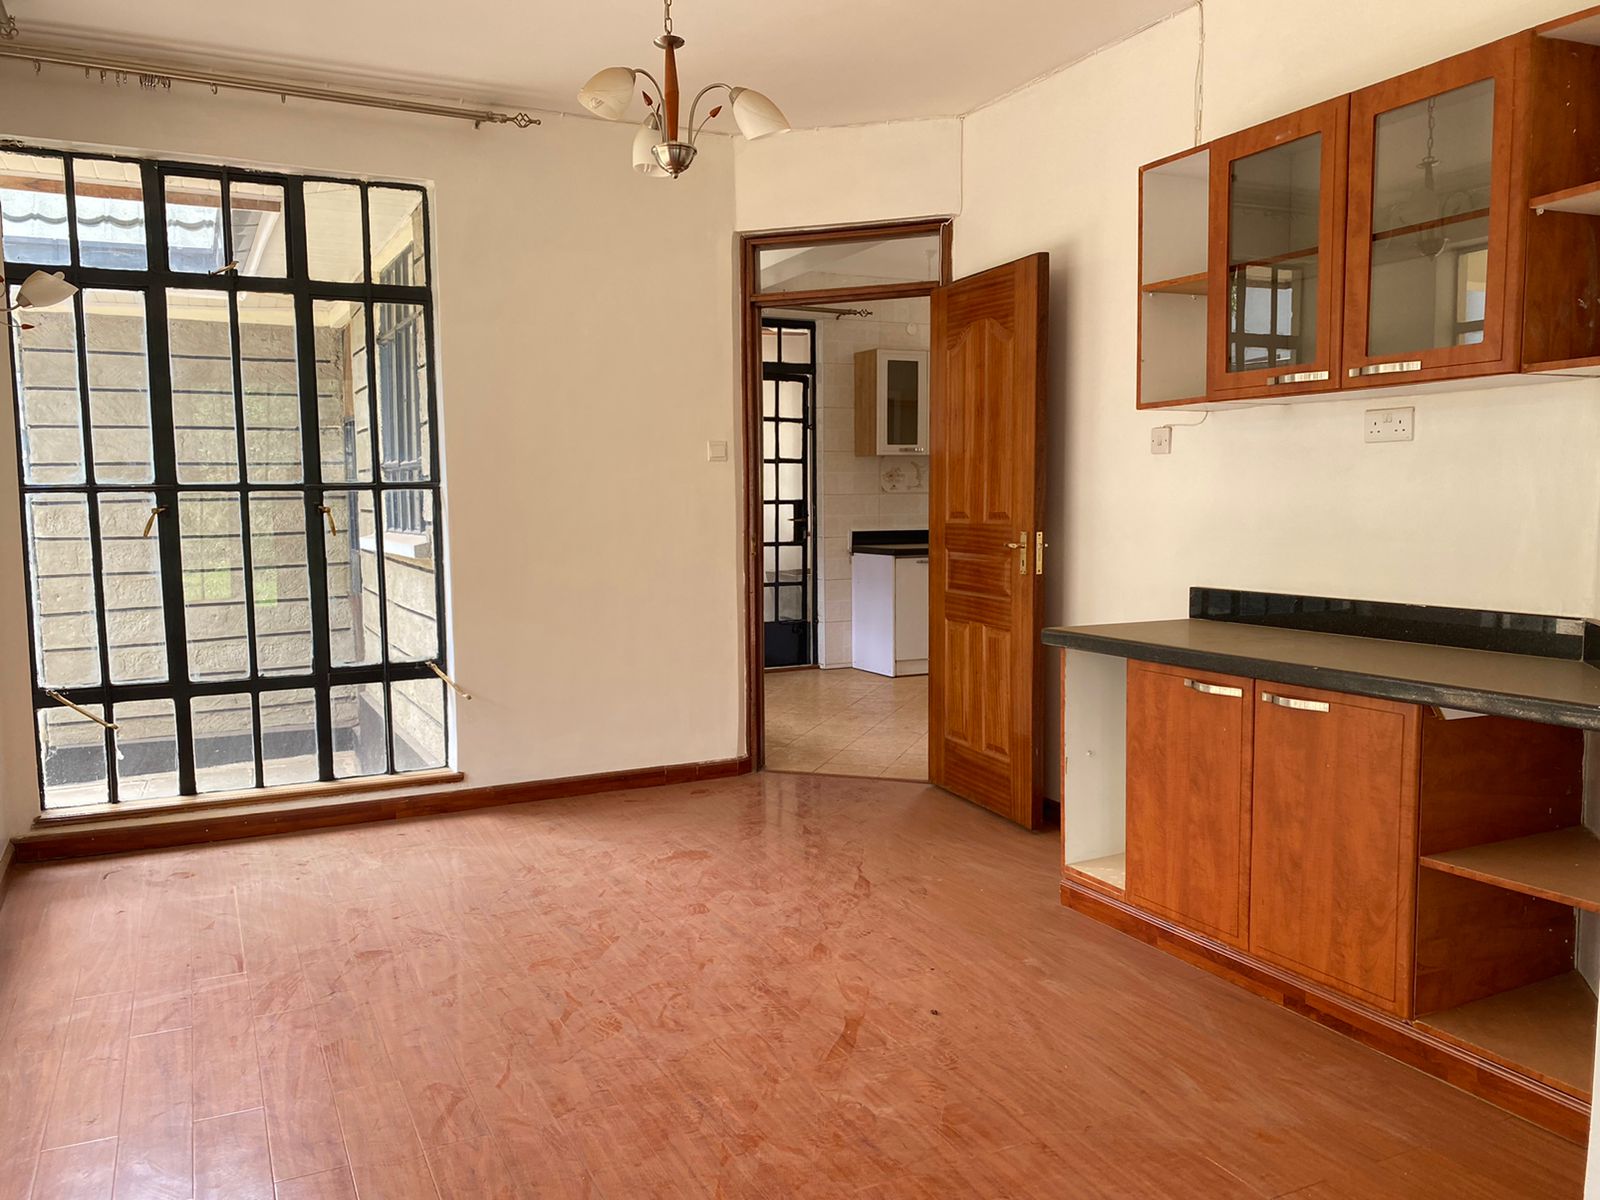 5 bedroom House in lavington all ensuite plus dsq for Sale at Ksh47m Negotiable (6)